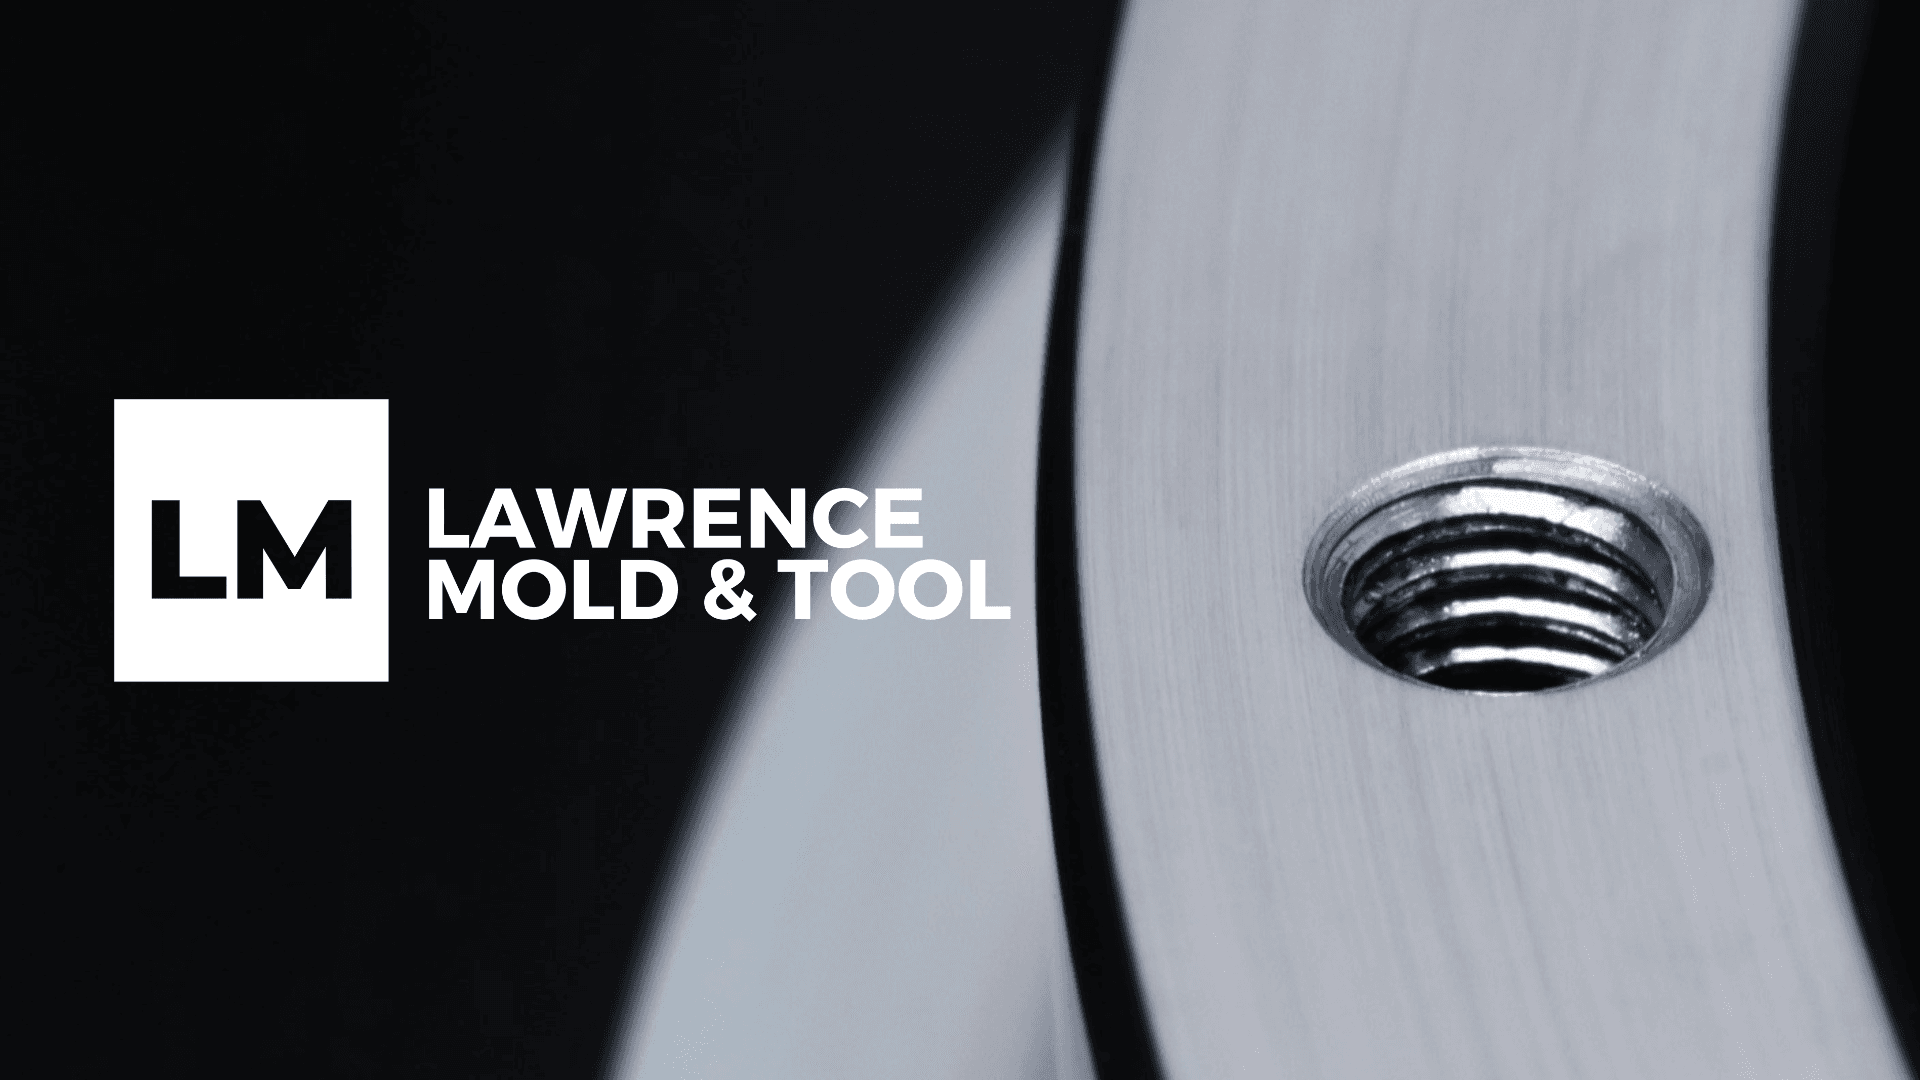 Product: Services | Lawrence Mold & Tool